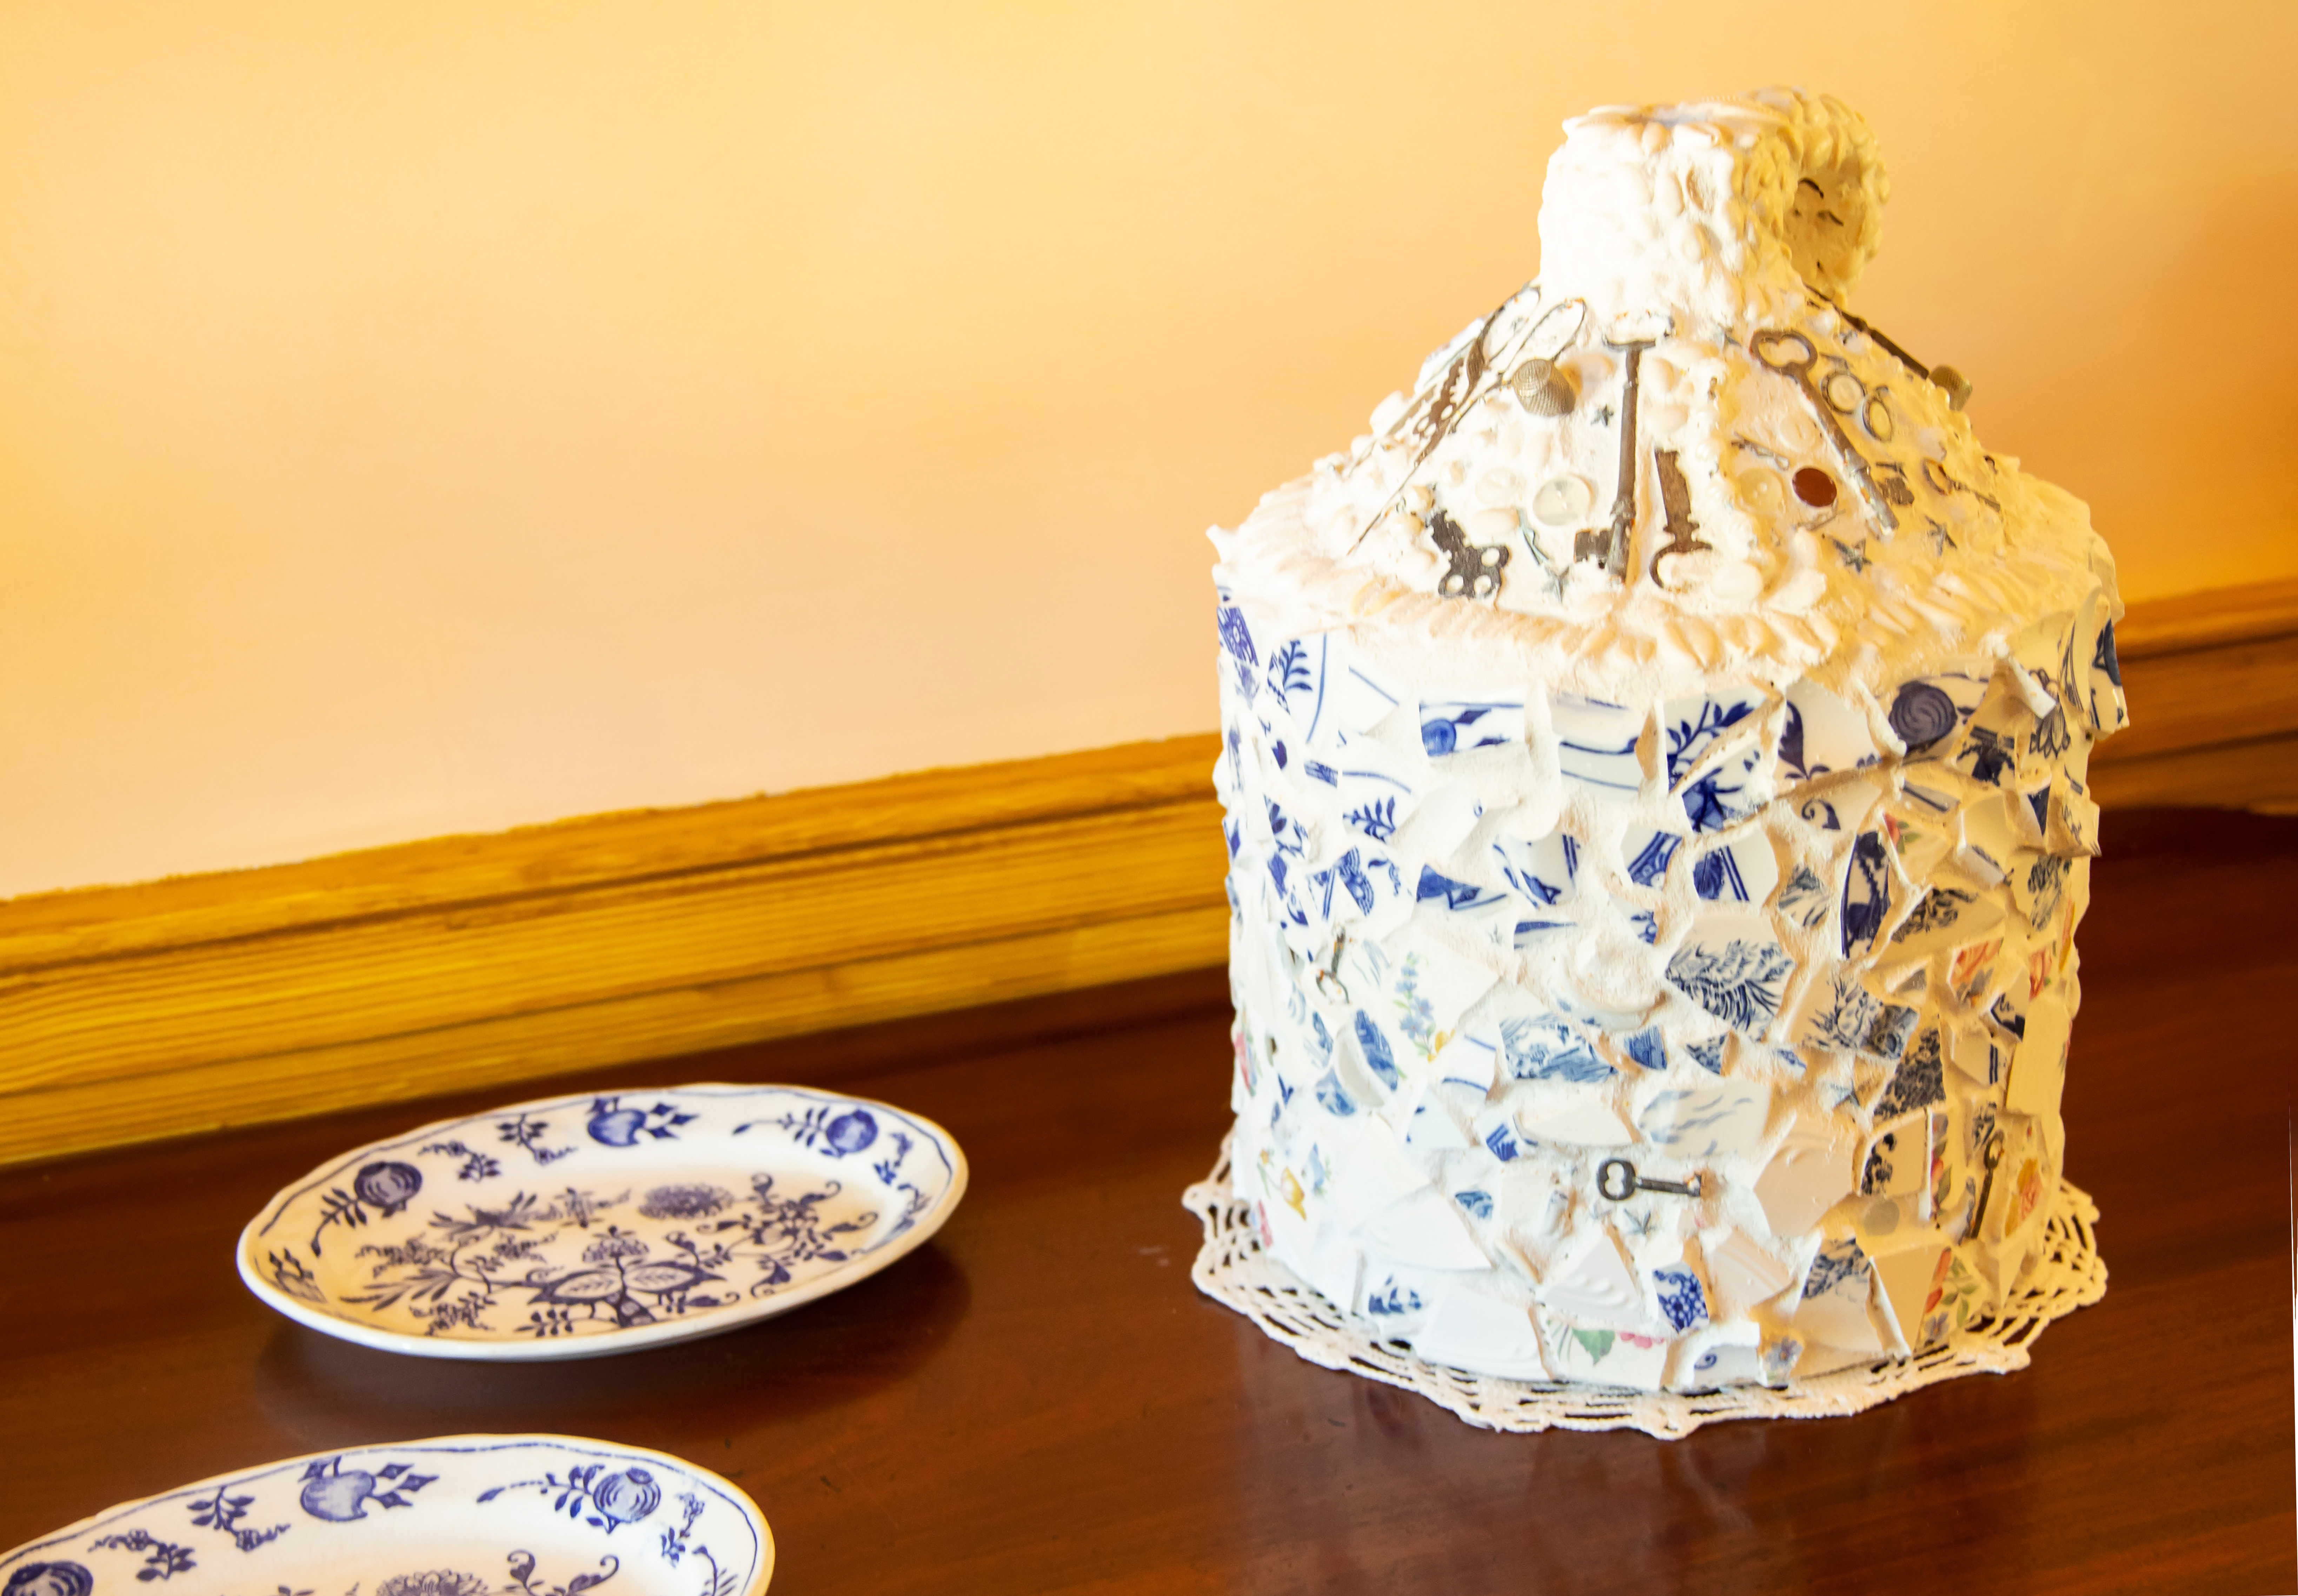 Memory jug art. A jug covered in white plaster with blue tiles and small trinkets embedded.